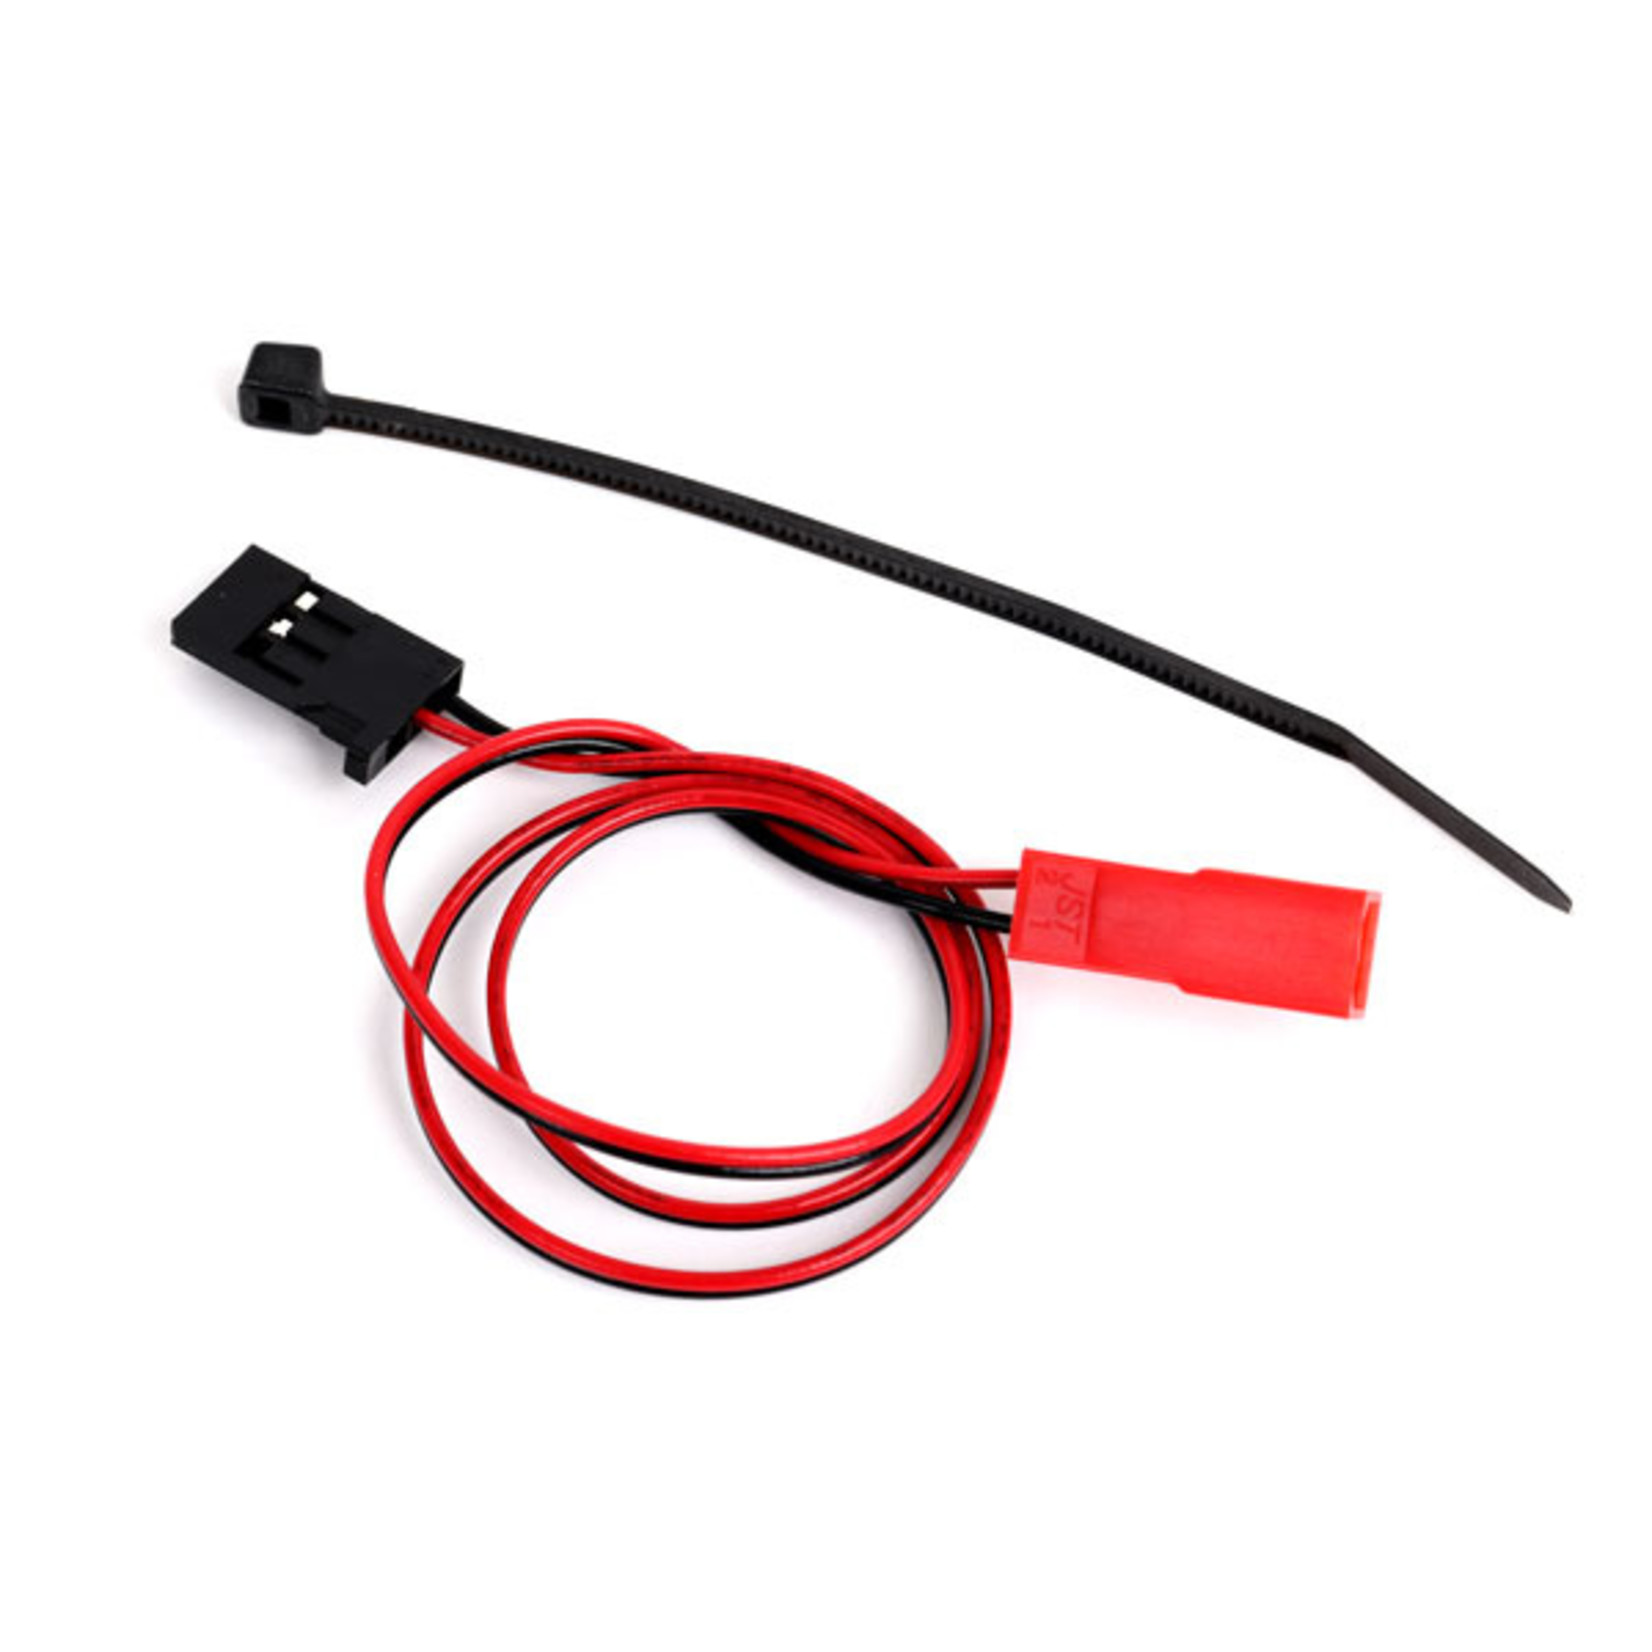 Traxxas 3478 - Wire harness (for use with #3475 cooling fa